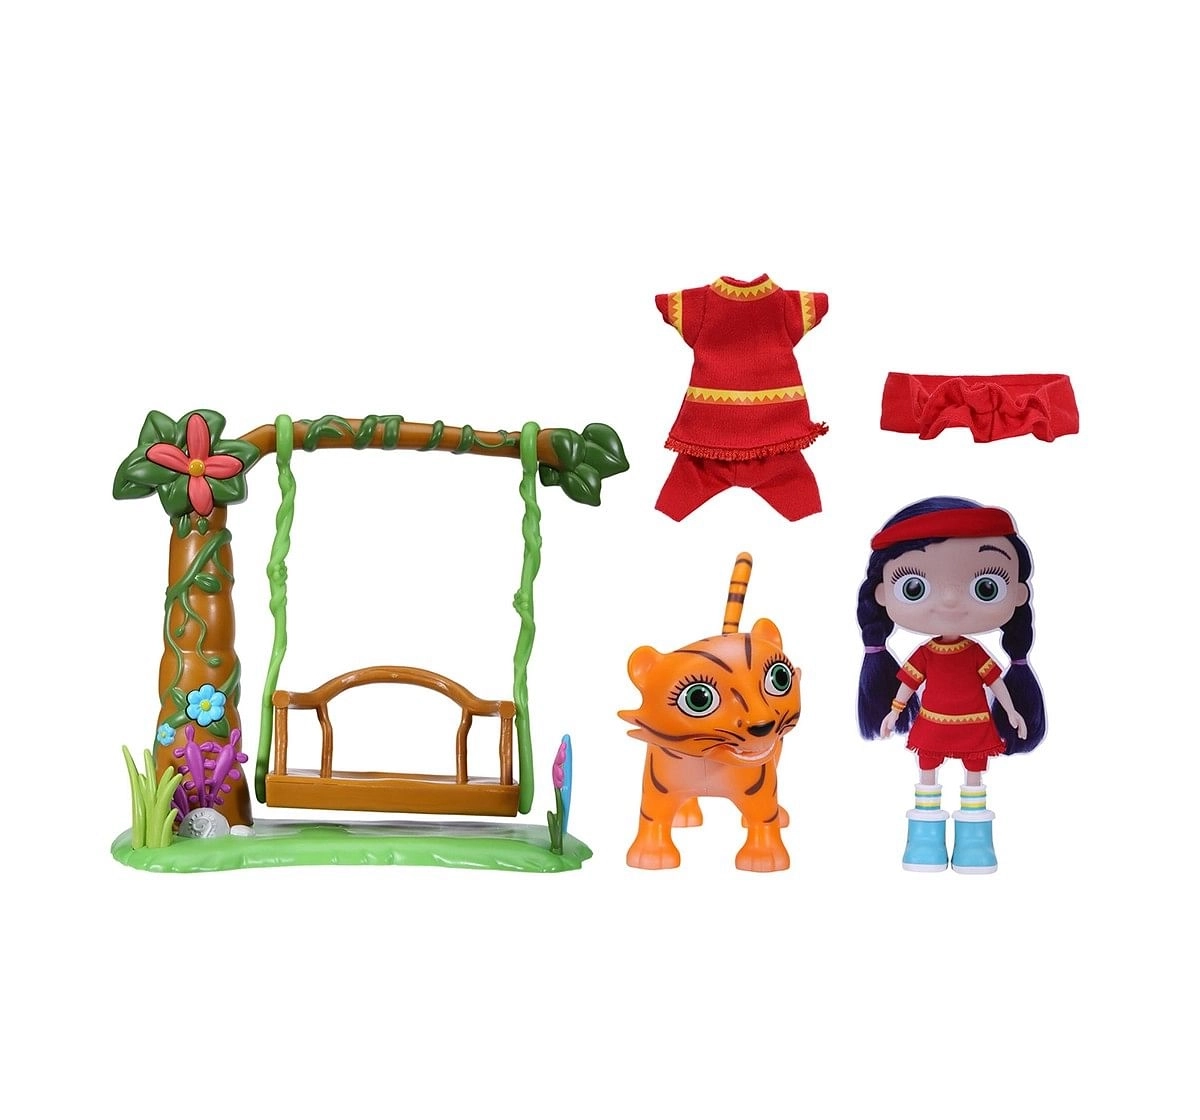 Wissper Forest World Play Set Roleplay sets for age 3Y+ 